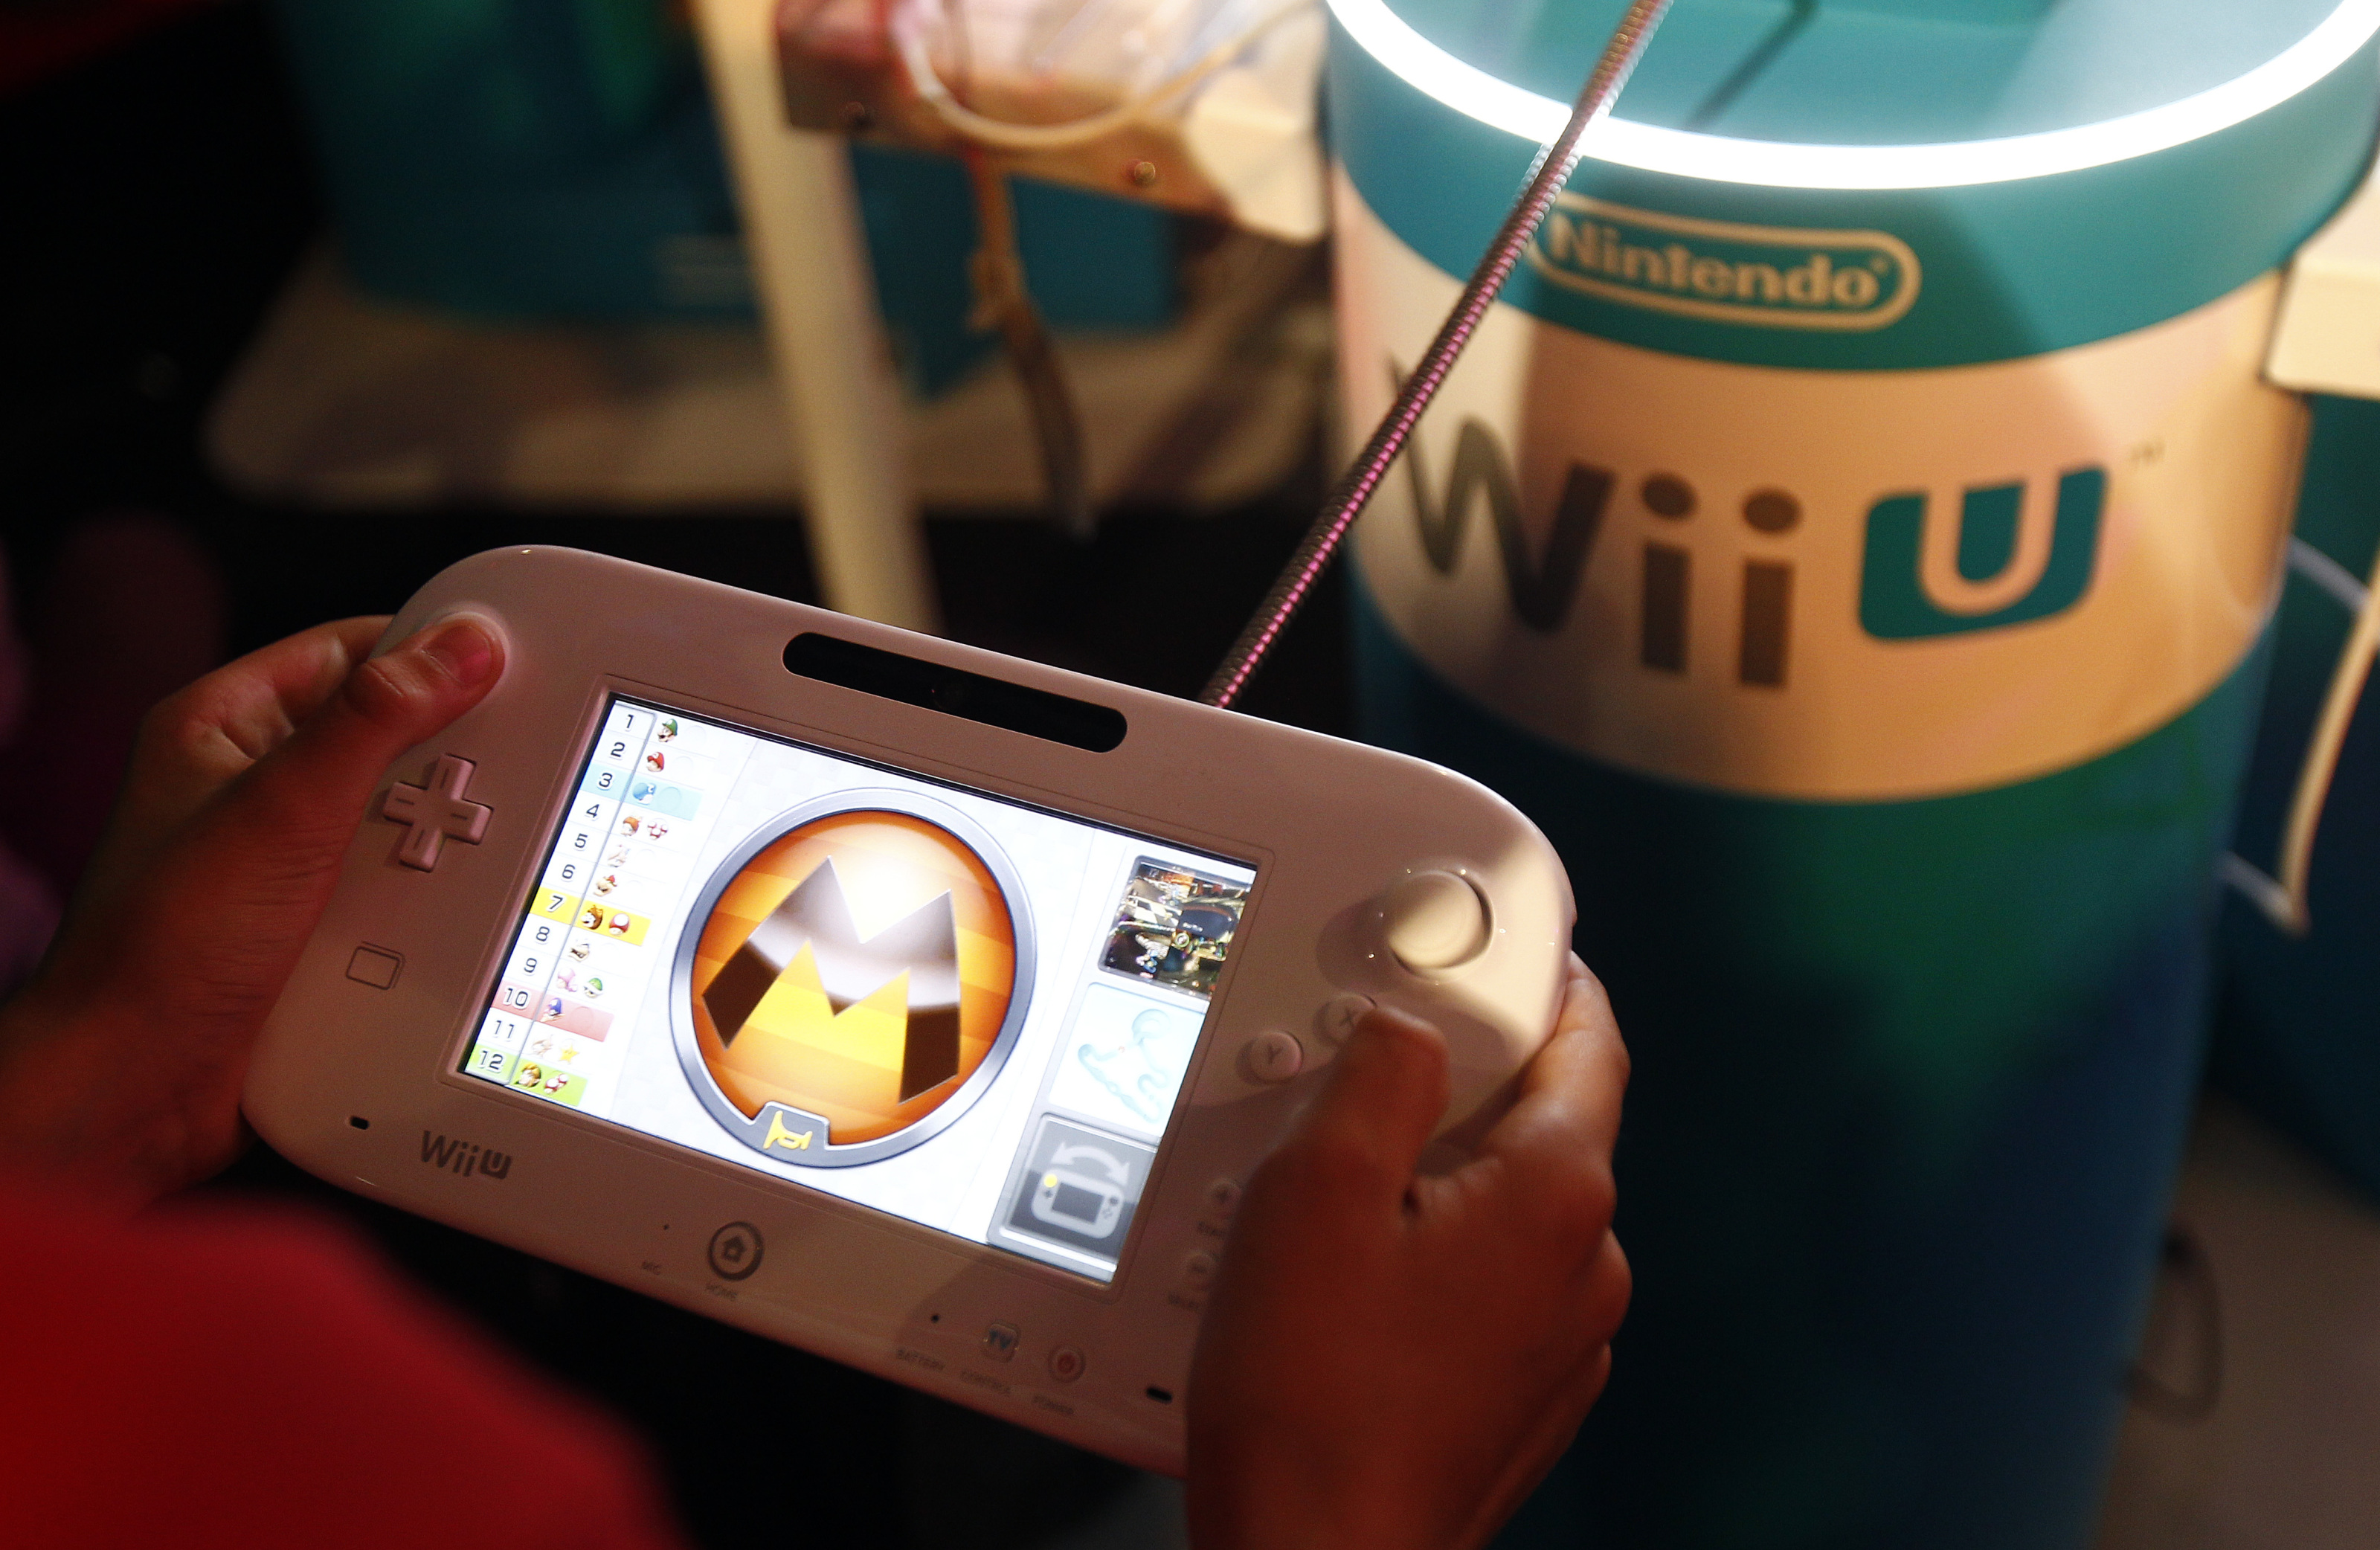 Nintendo Closing Wii U and 3DS eShops Next Year